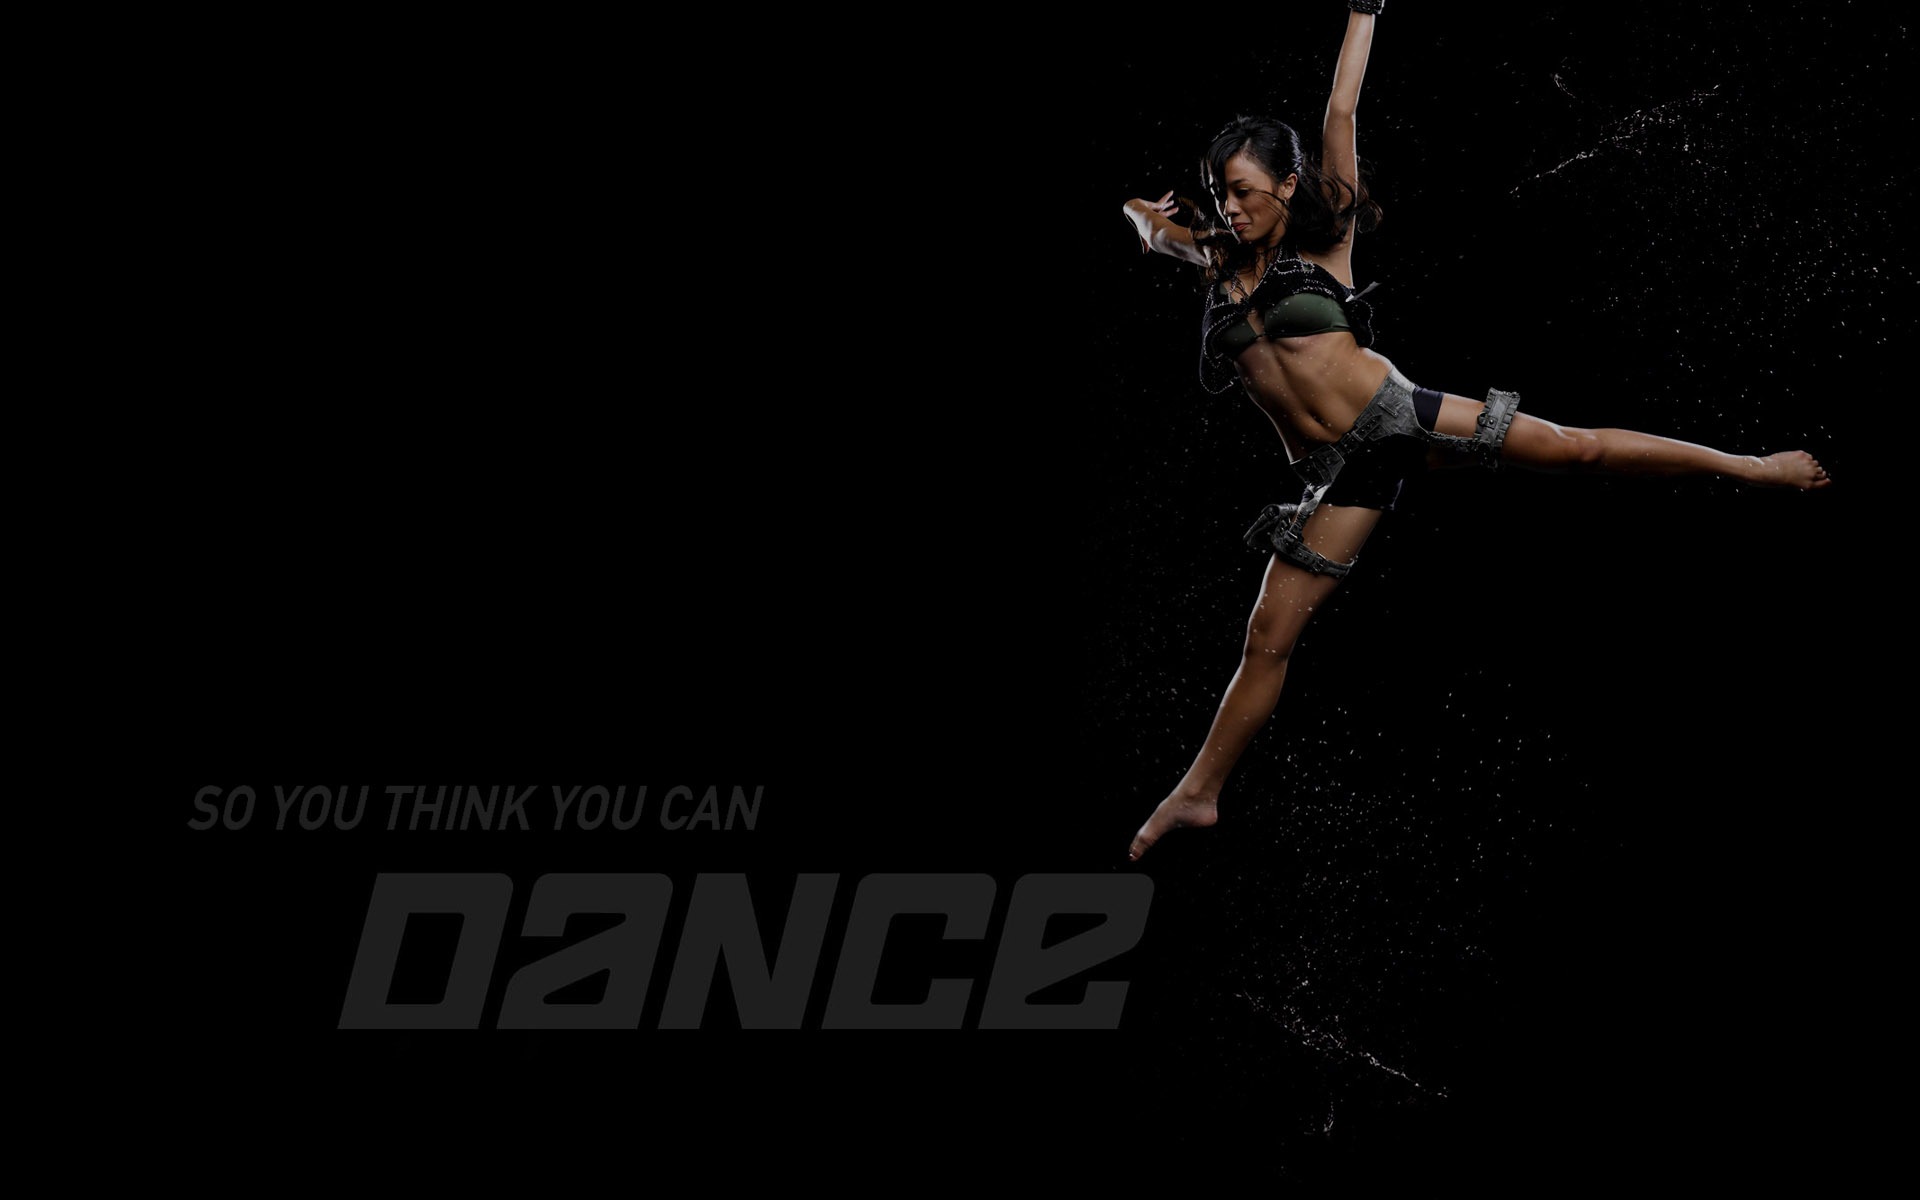 So You Think You Can Dance wallpaper (2) #3 - 1920x1200